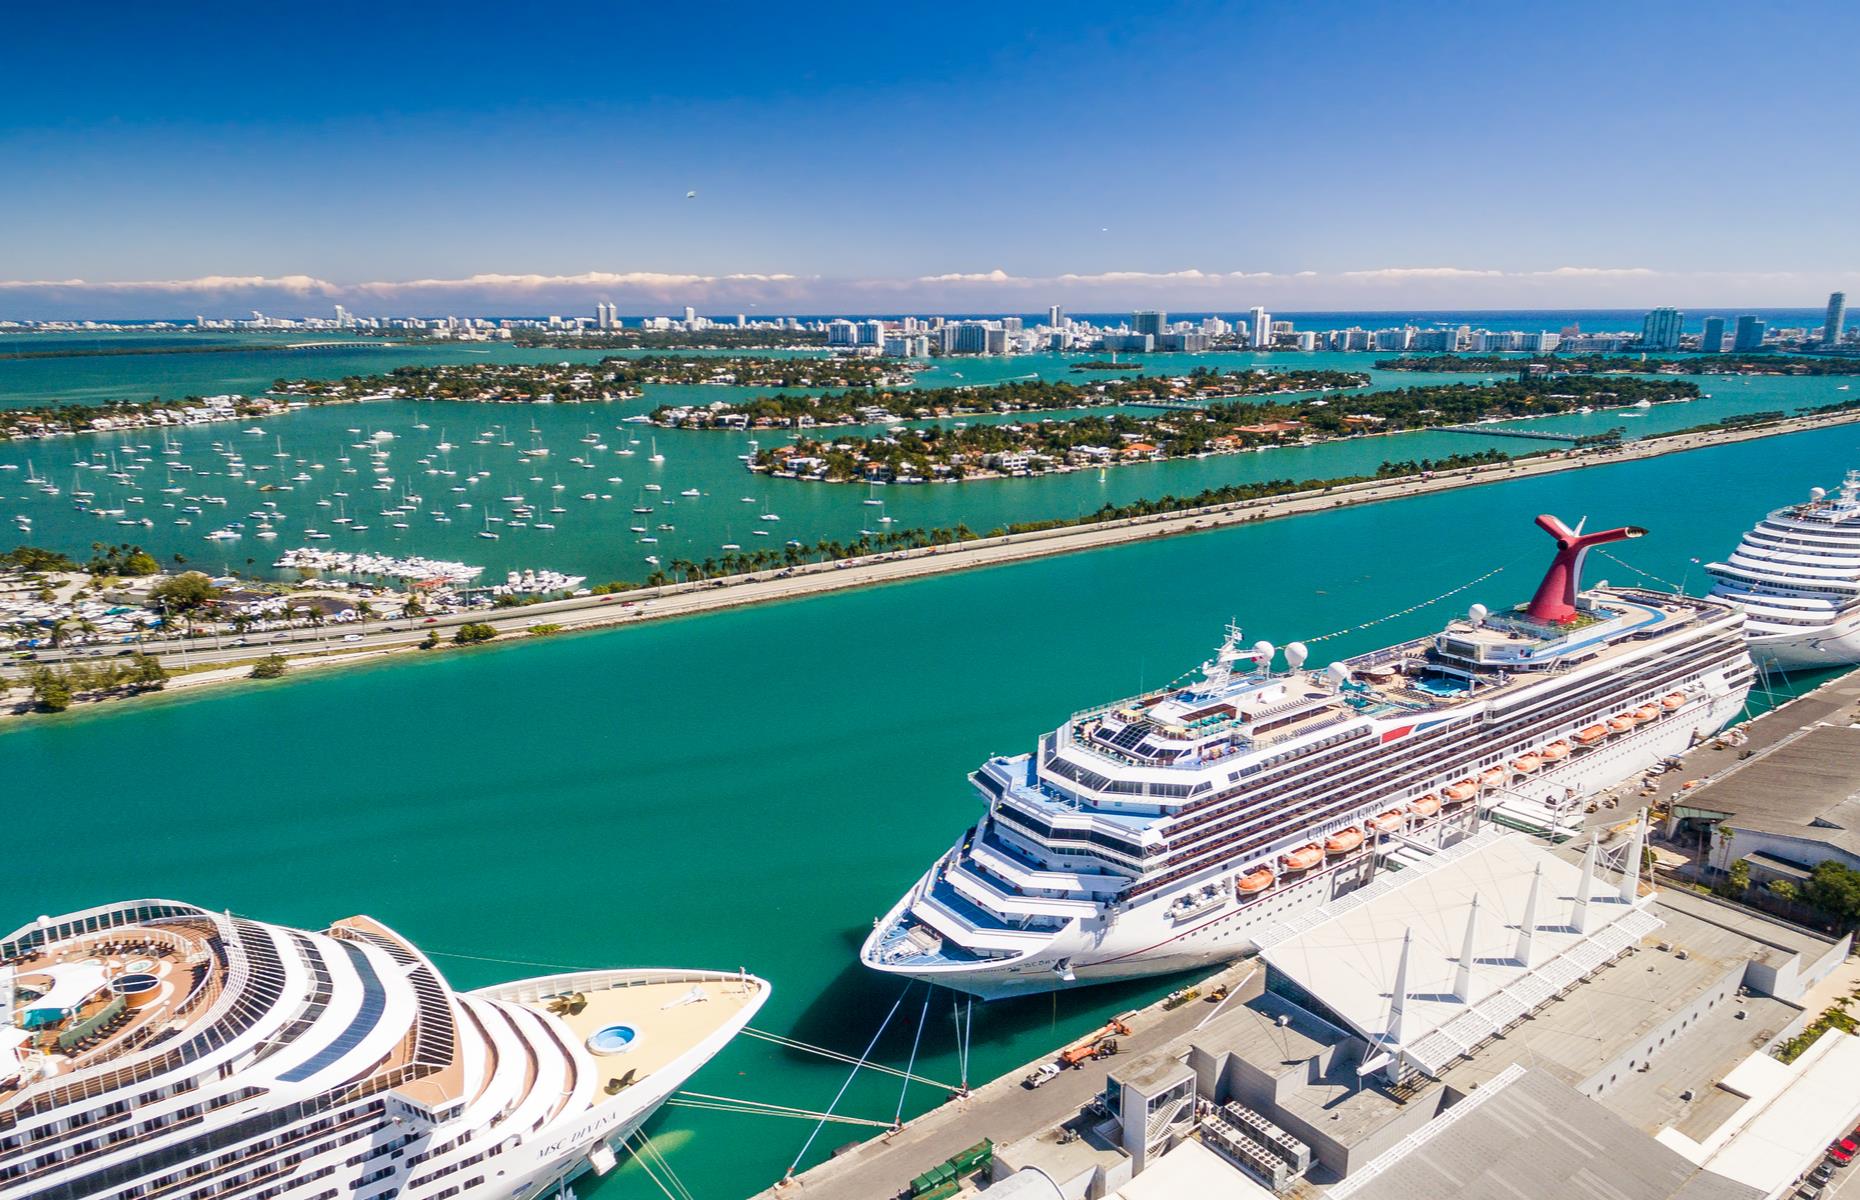 Sitting on the southern tip of the Sunshine State, the Port of Miami – also known as PortMiami – is known as the cruise capital of the world, typically visited each year by 22 cruise lines berthing 55 ships and millions of passengers. While cruising may be off the cards for the time being, the majestic port is still a sight to behold. Its dazzling waters are dotted with yachts, with views of the Star, Palm and Hibiscus man-made islands.